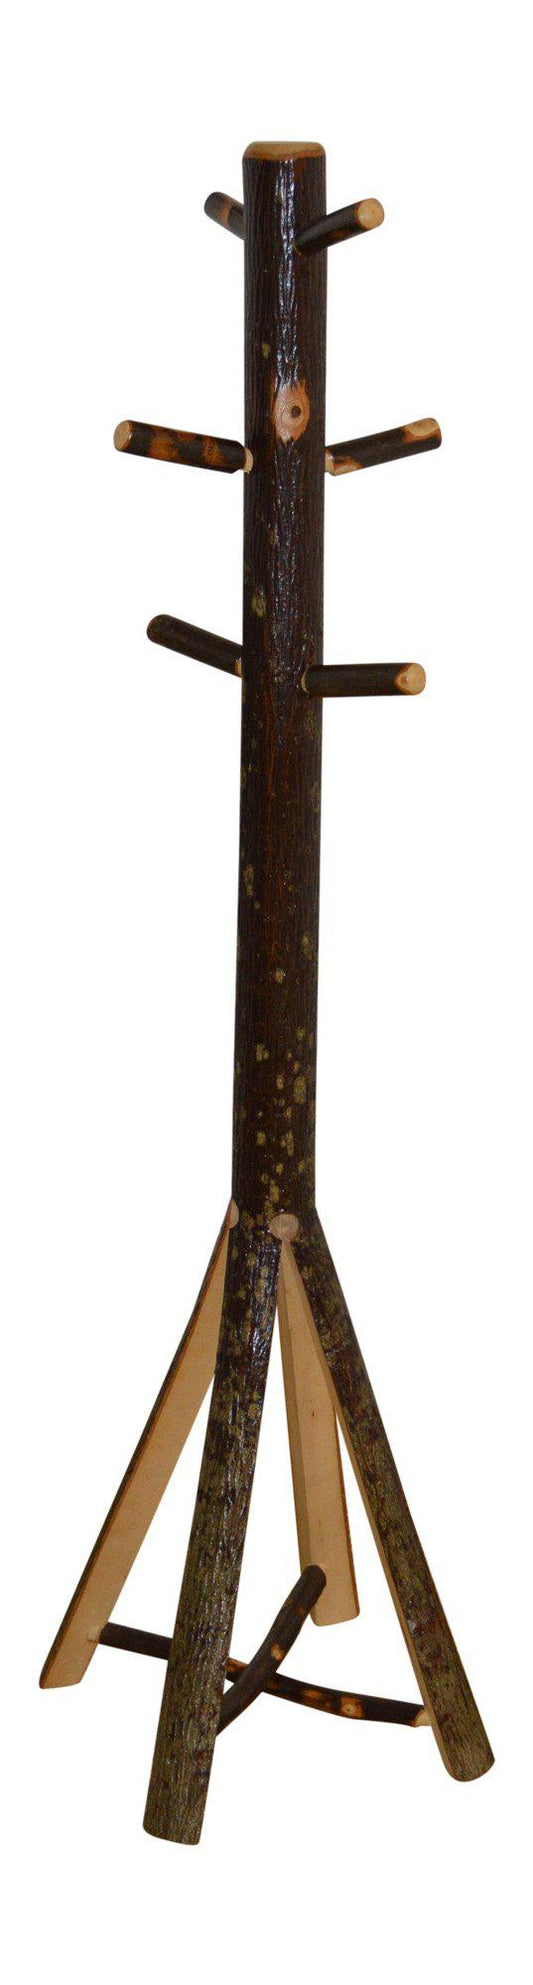 A&L Furniture Co. Amish Rustic Hickory Split Base Coat Tree - LEAD TIME TO SHIP 4 WEEKS OR LESS